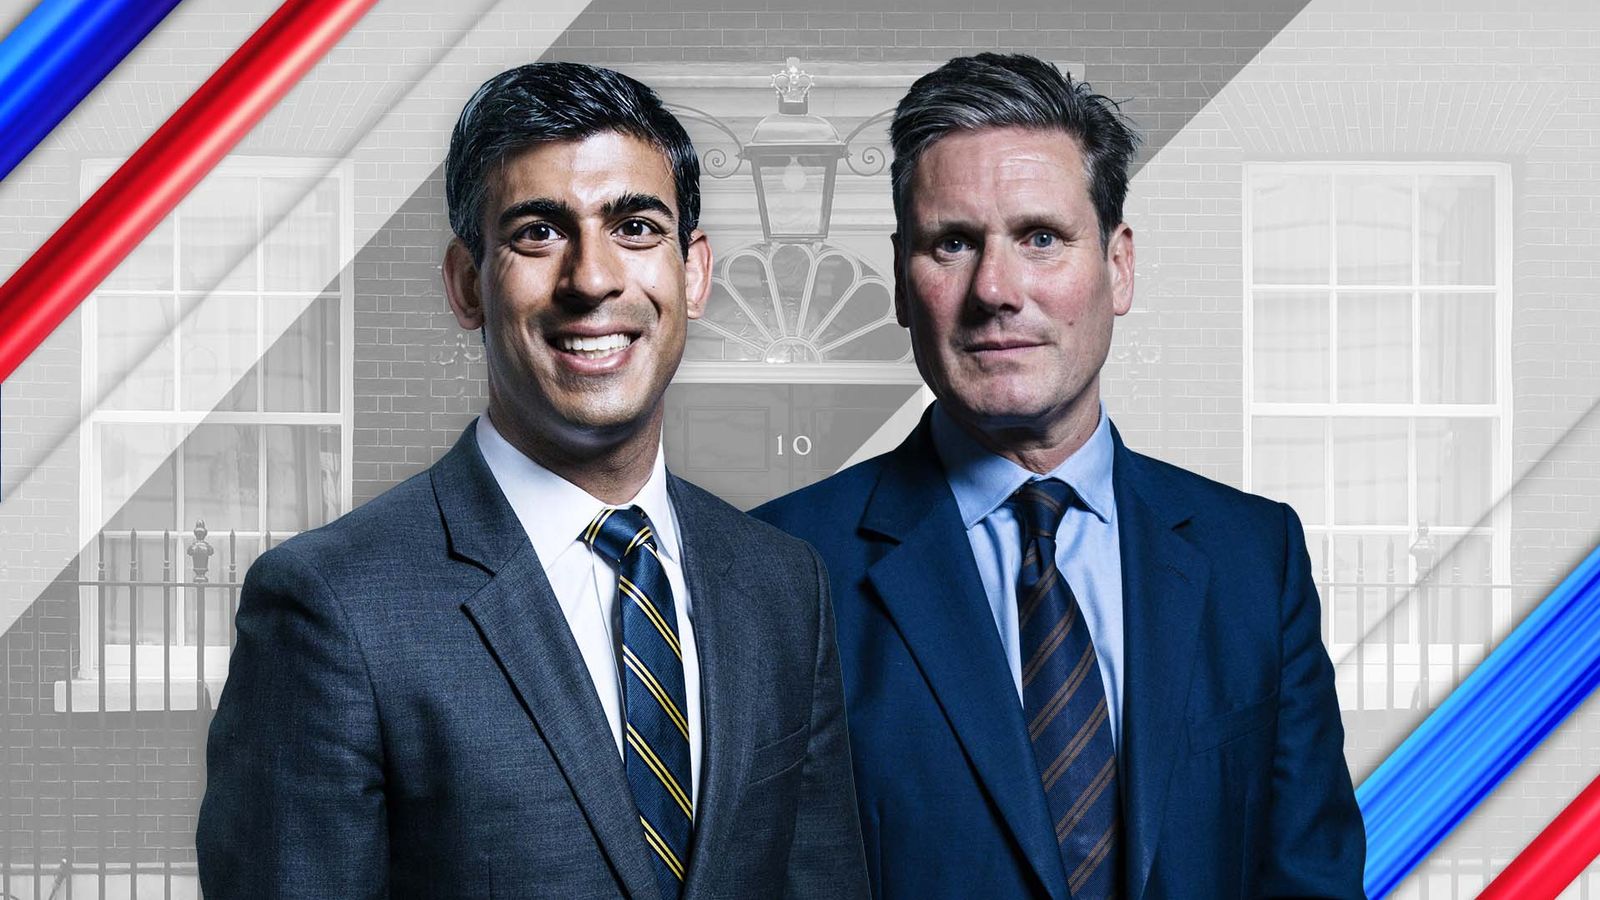 Rishi Sunak vs Keir Starmer: How do they measure up in the eyes of voters?